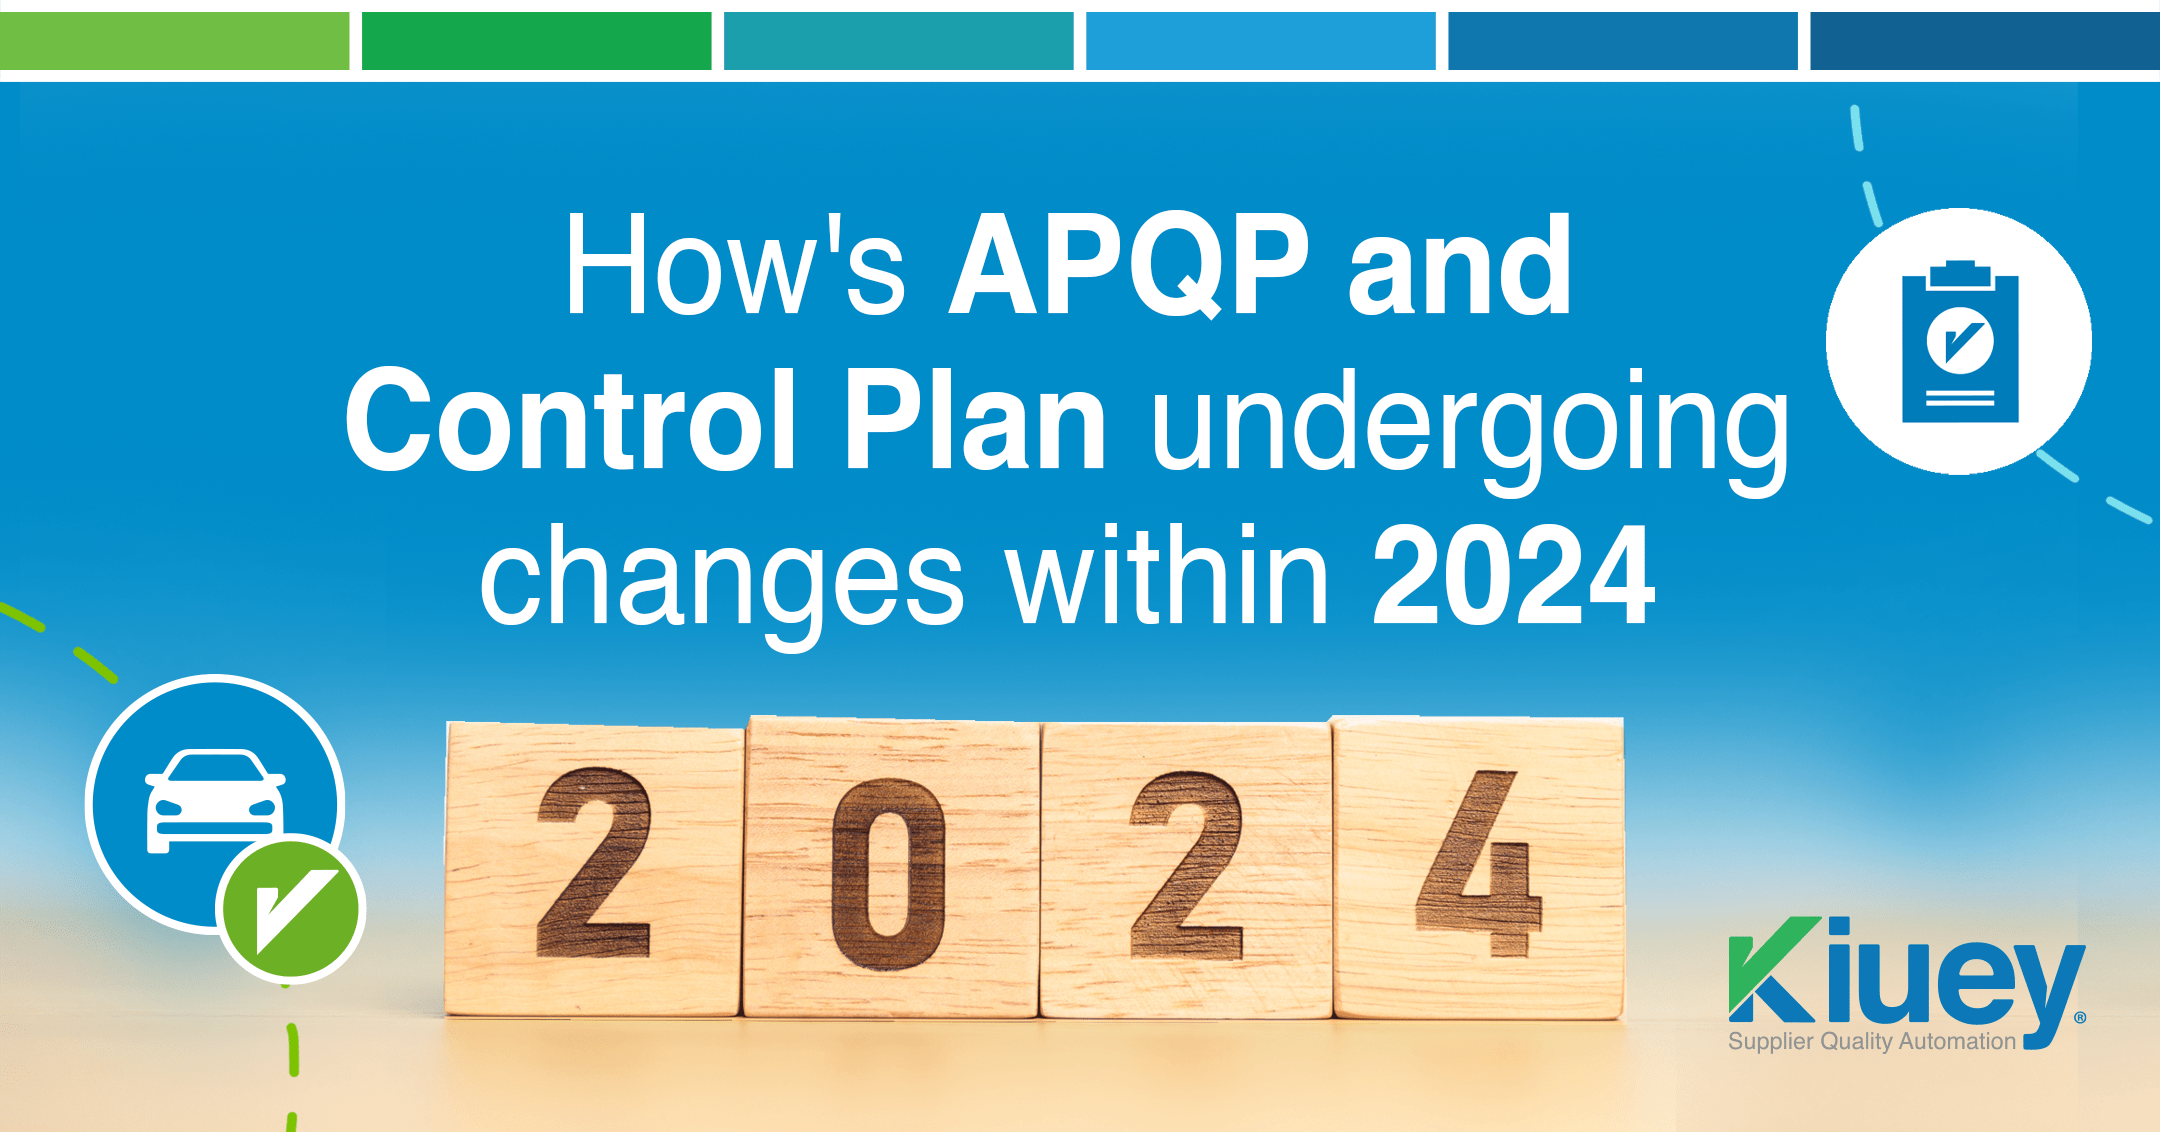 How’s APQP and Control Plan undergoing changes within 2024